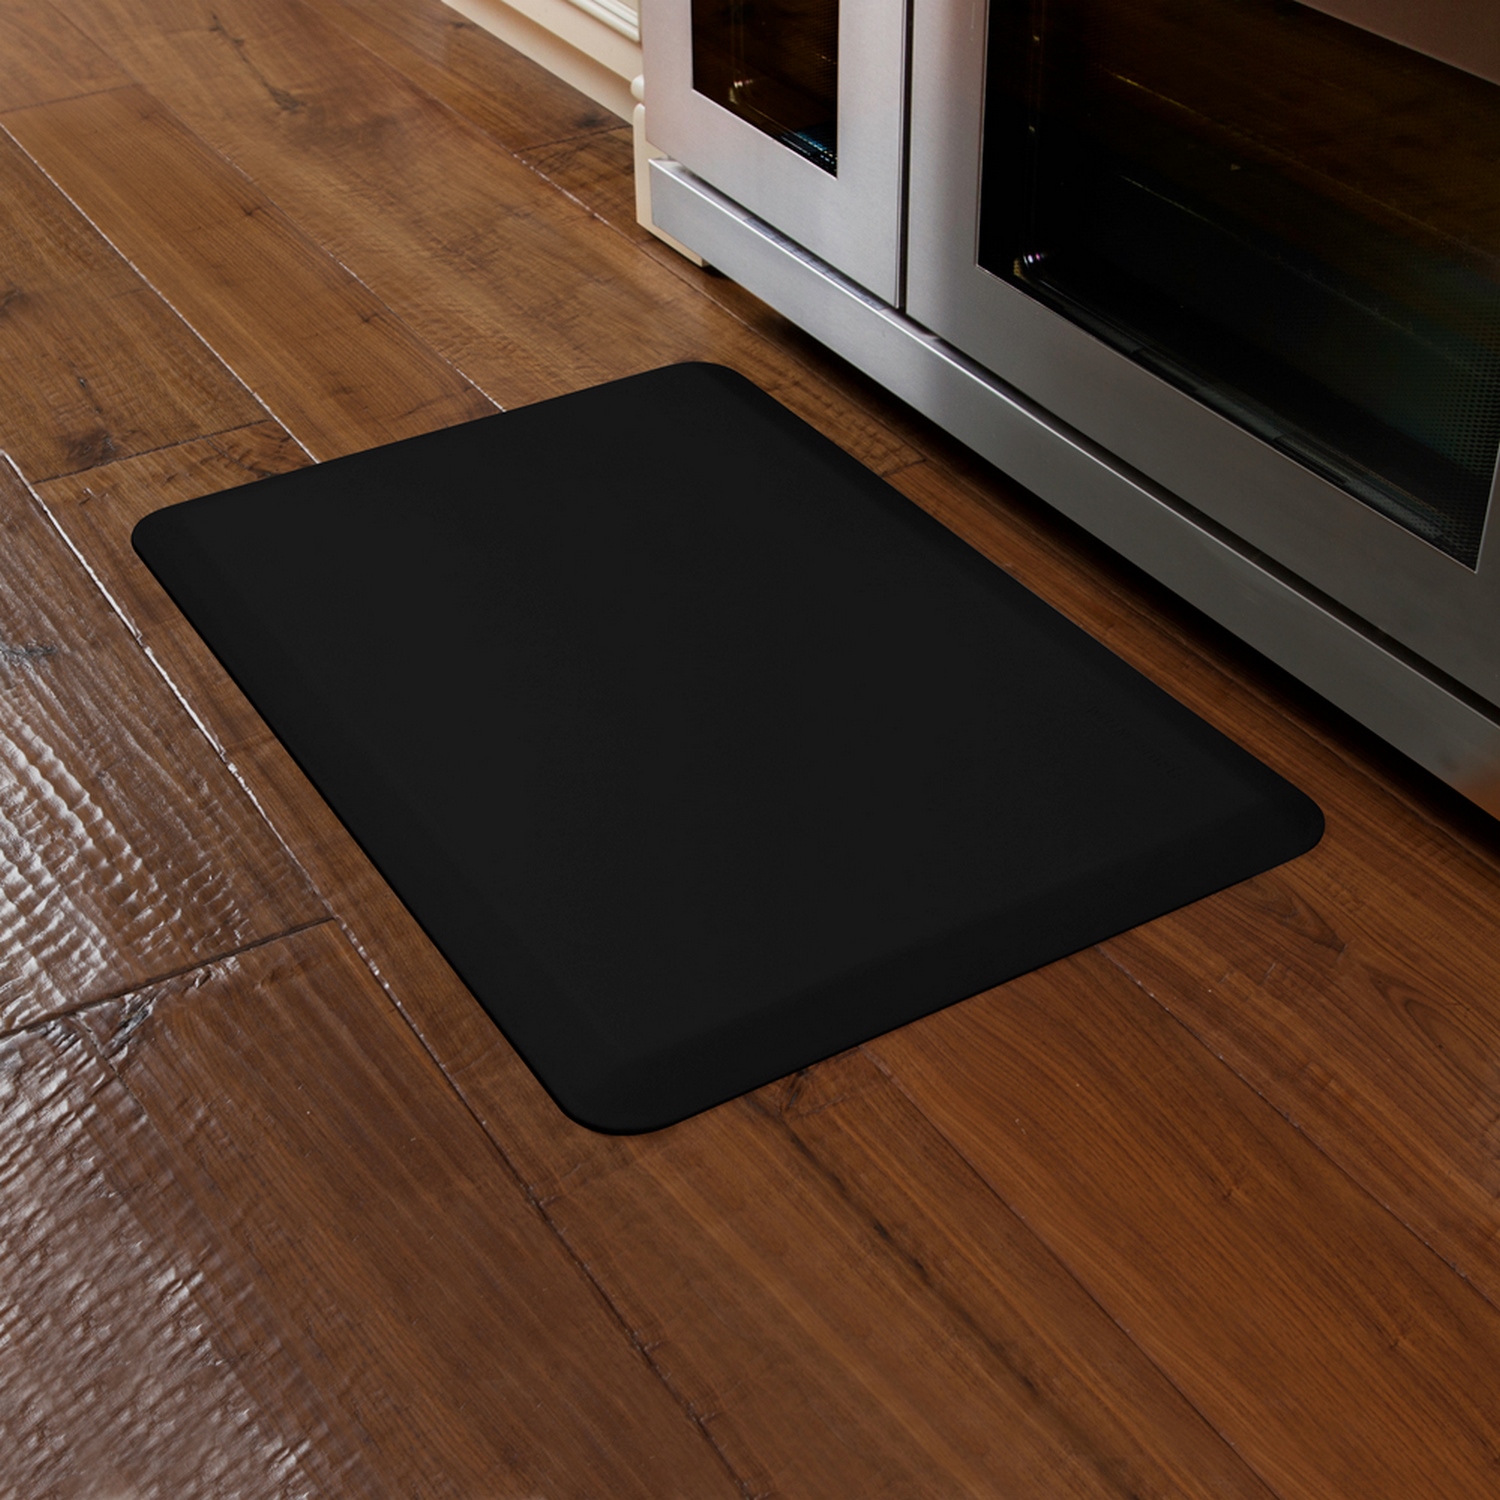 Anti-Fatigue WellnessMats® Leather Collection